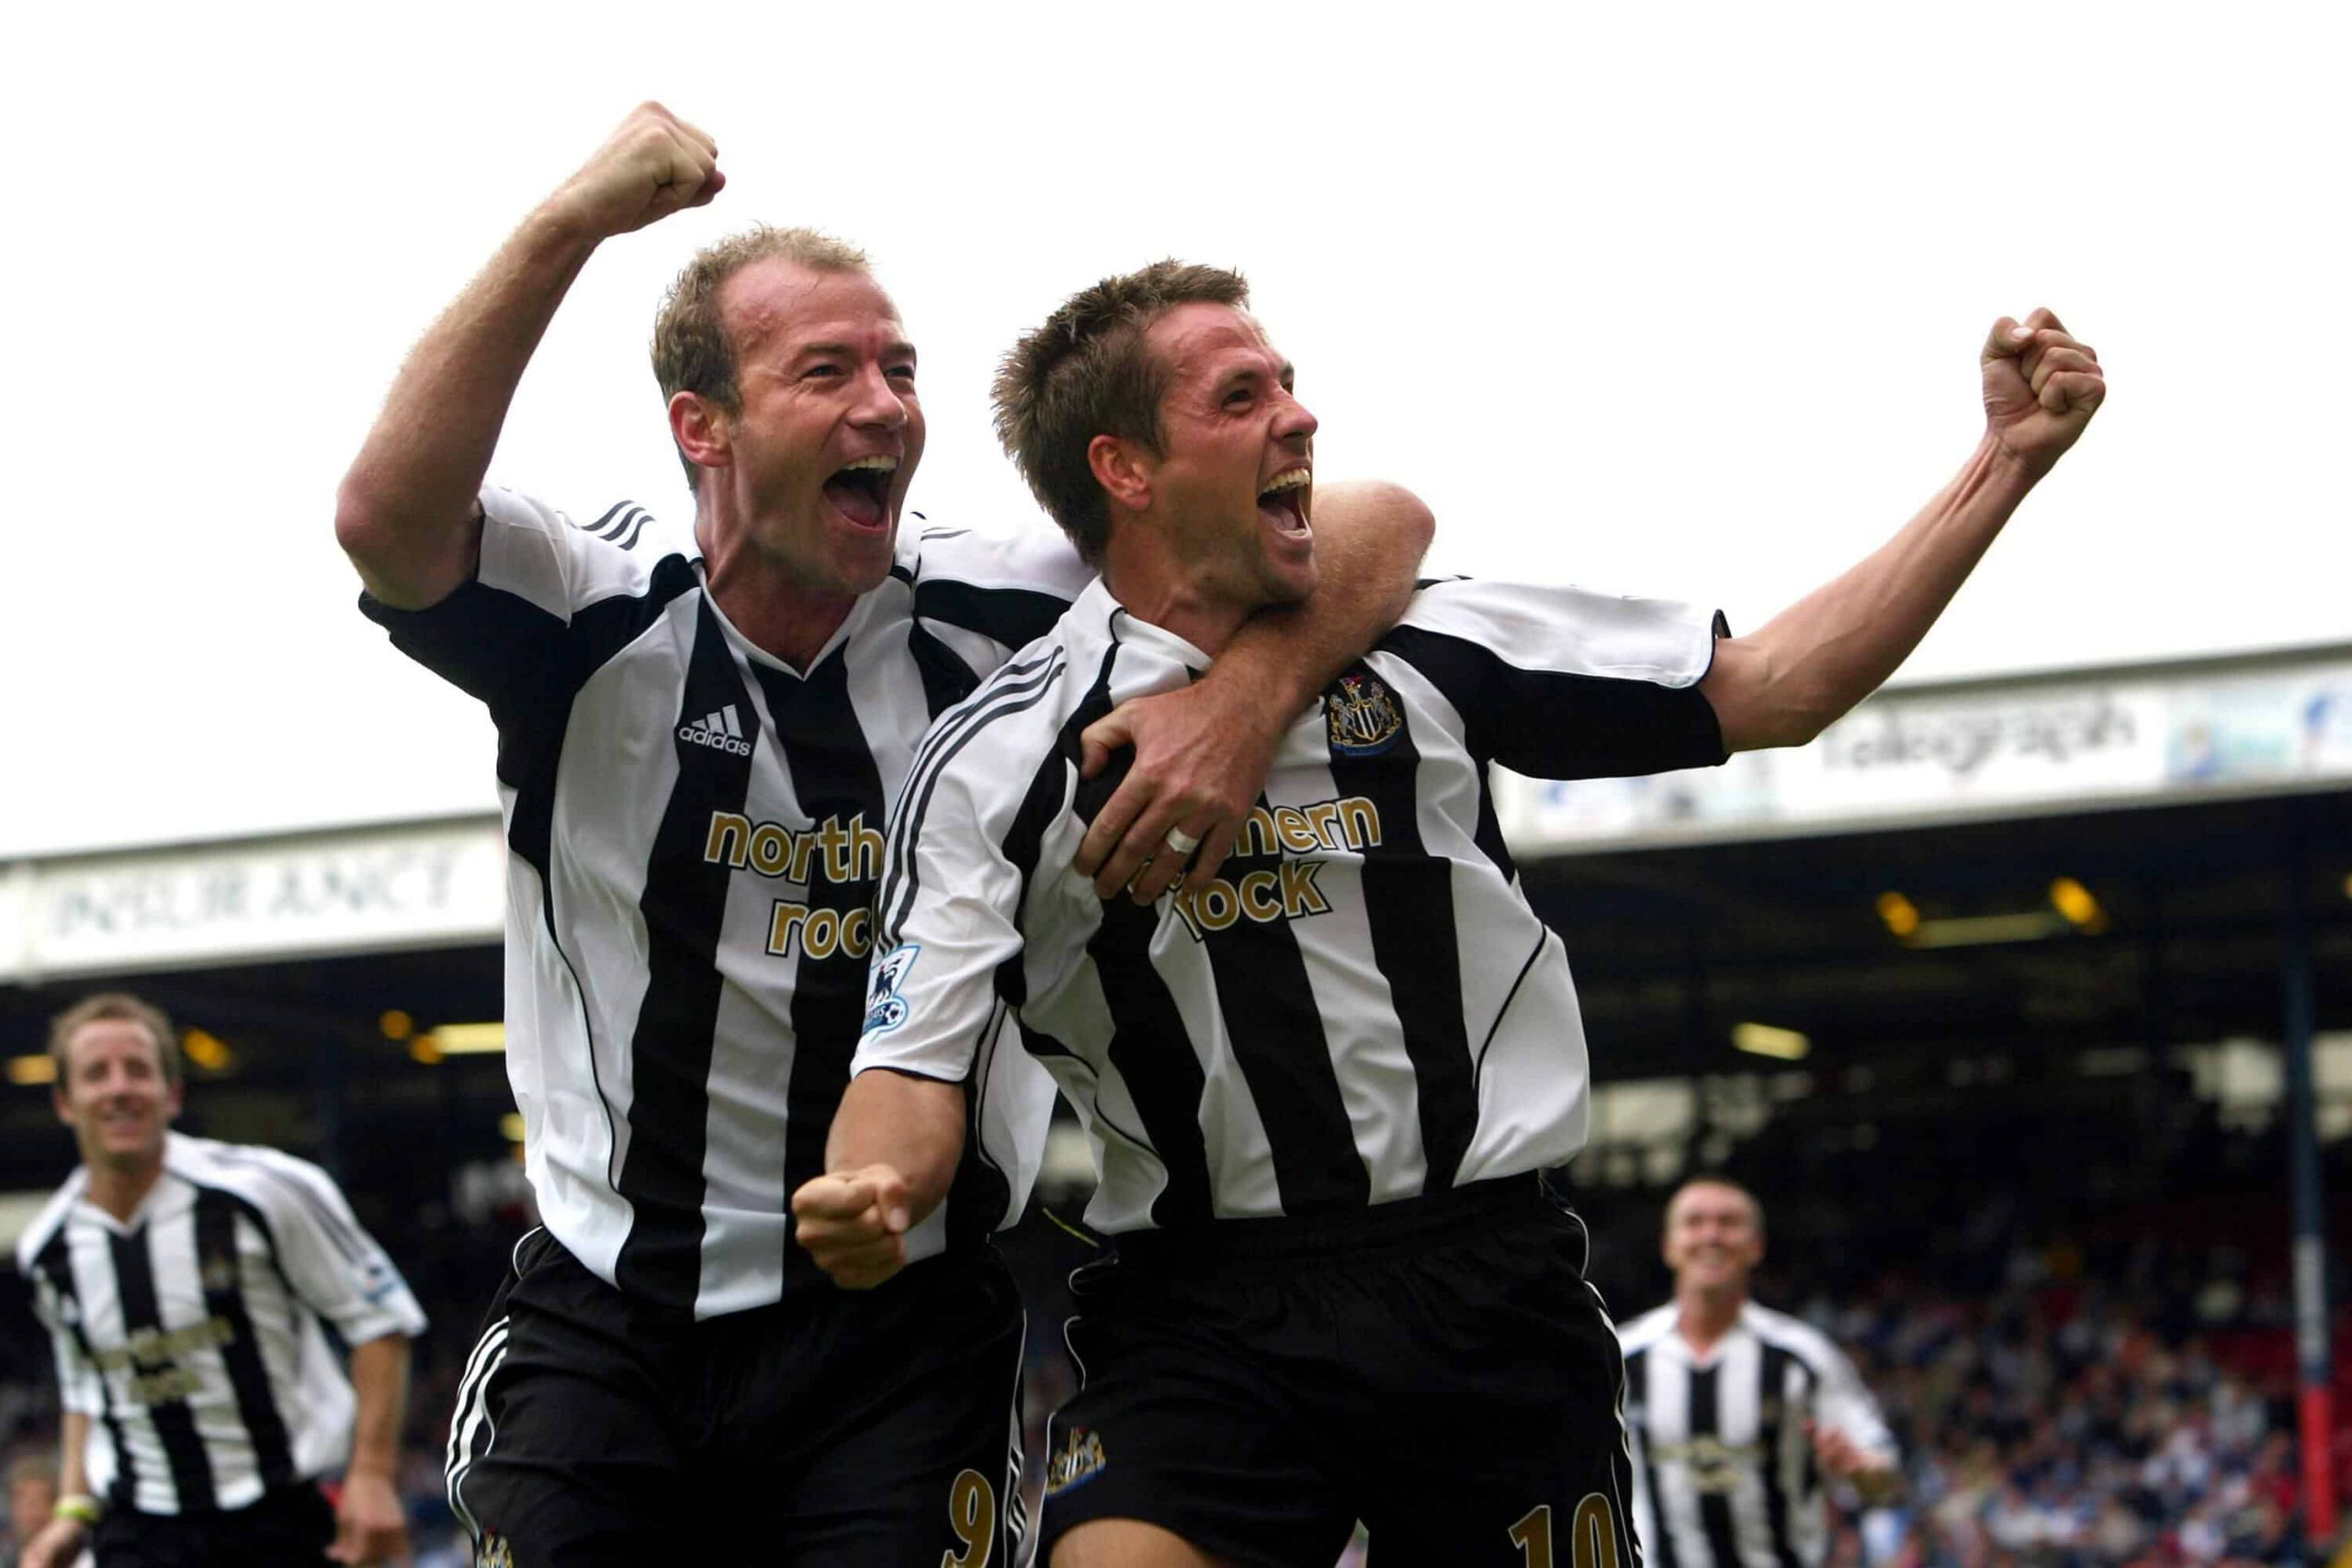 Did Newcastle United legend Shearer get into Owen’s all time XI? You won’t guess another person he annoyed